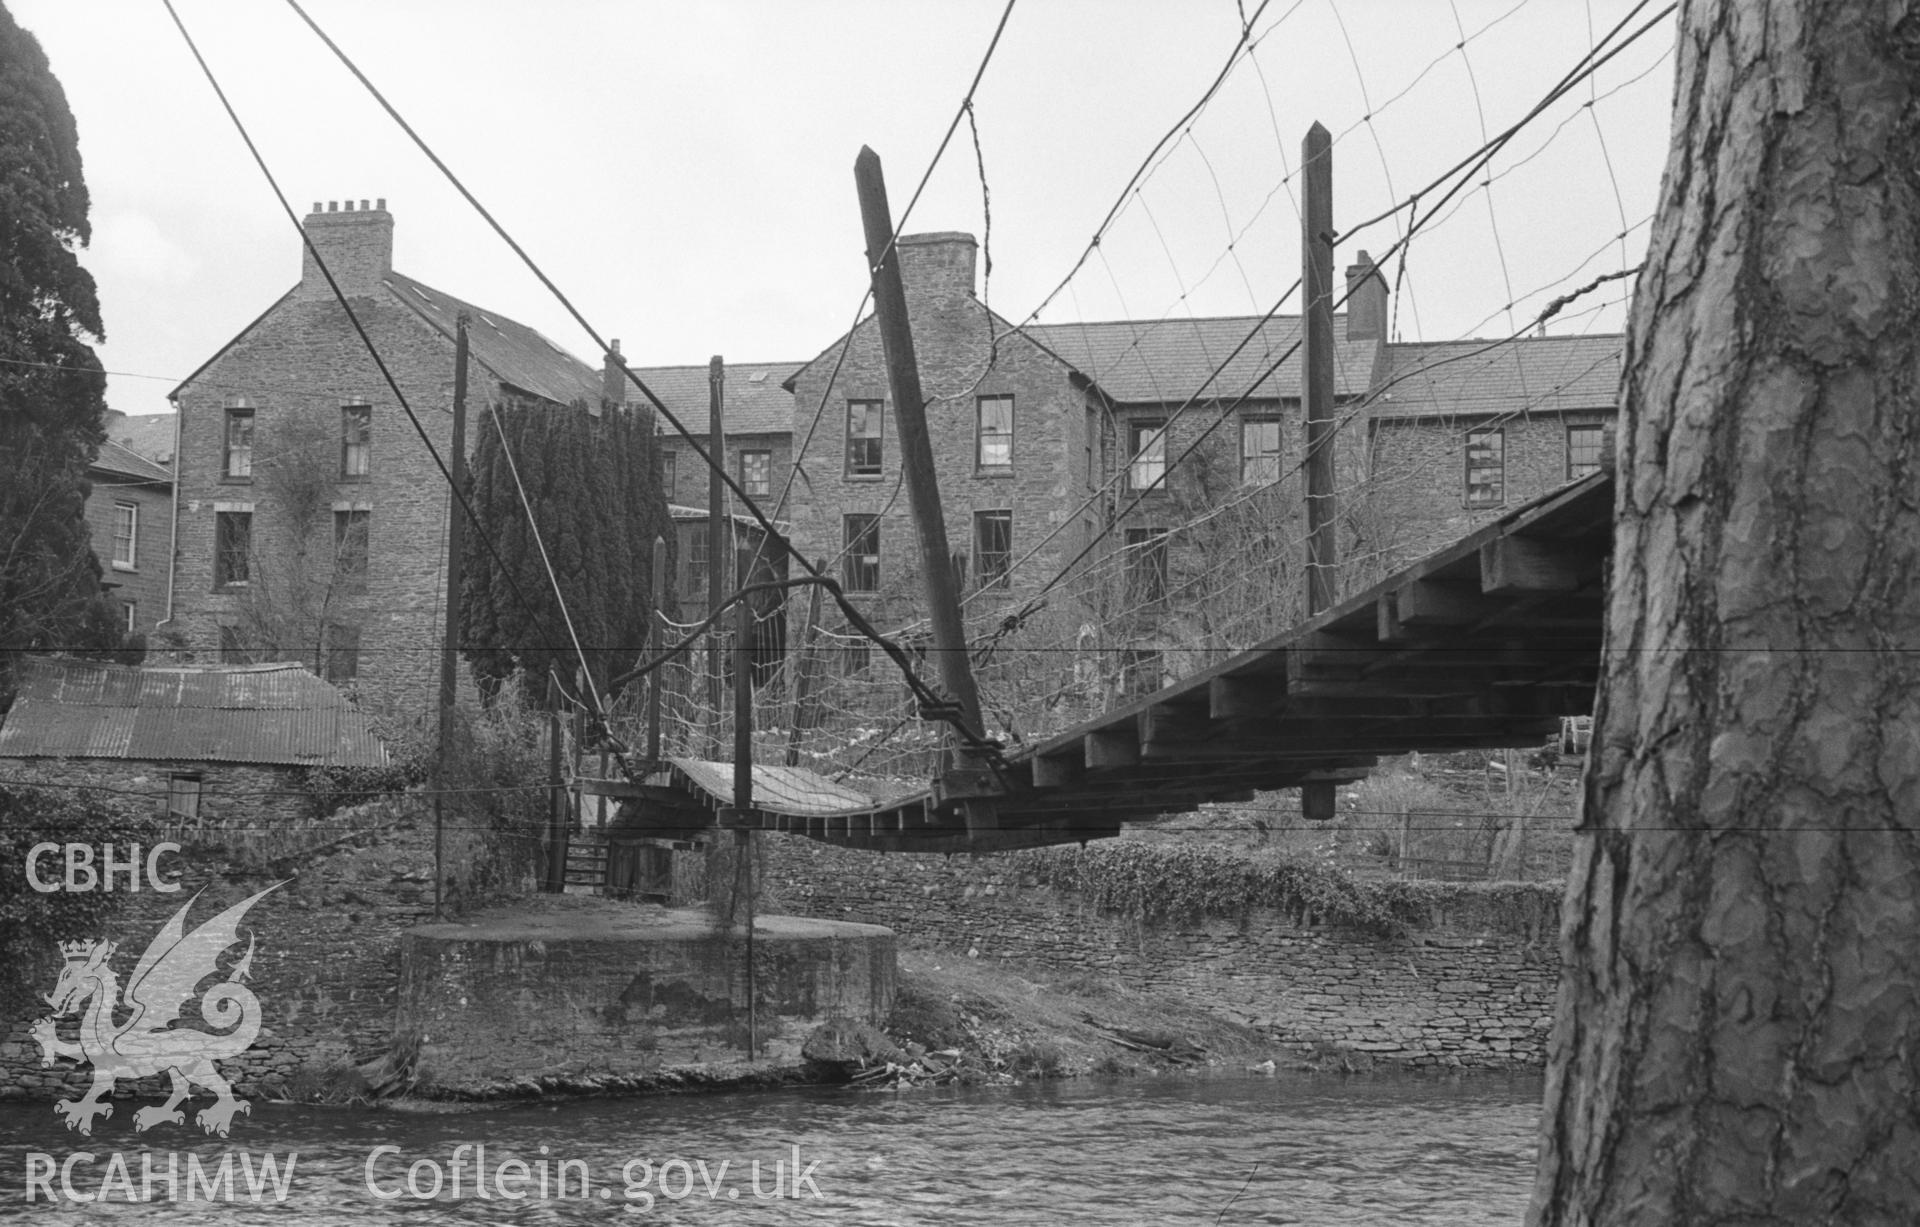 Digital copy of a black and white negative showing suspension wooden footbridge across the Teifi to Dol-llan. Photographed in April 1963 by Arthur O. Chater from Grid Reference SN 4193 4074, looking west north west.